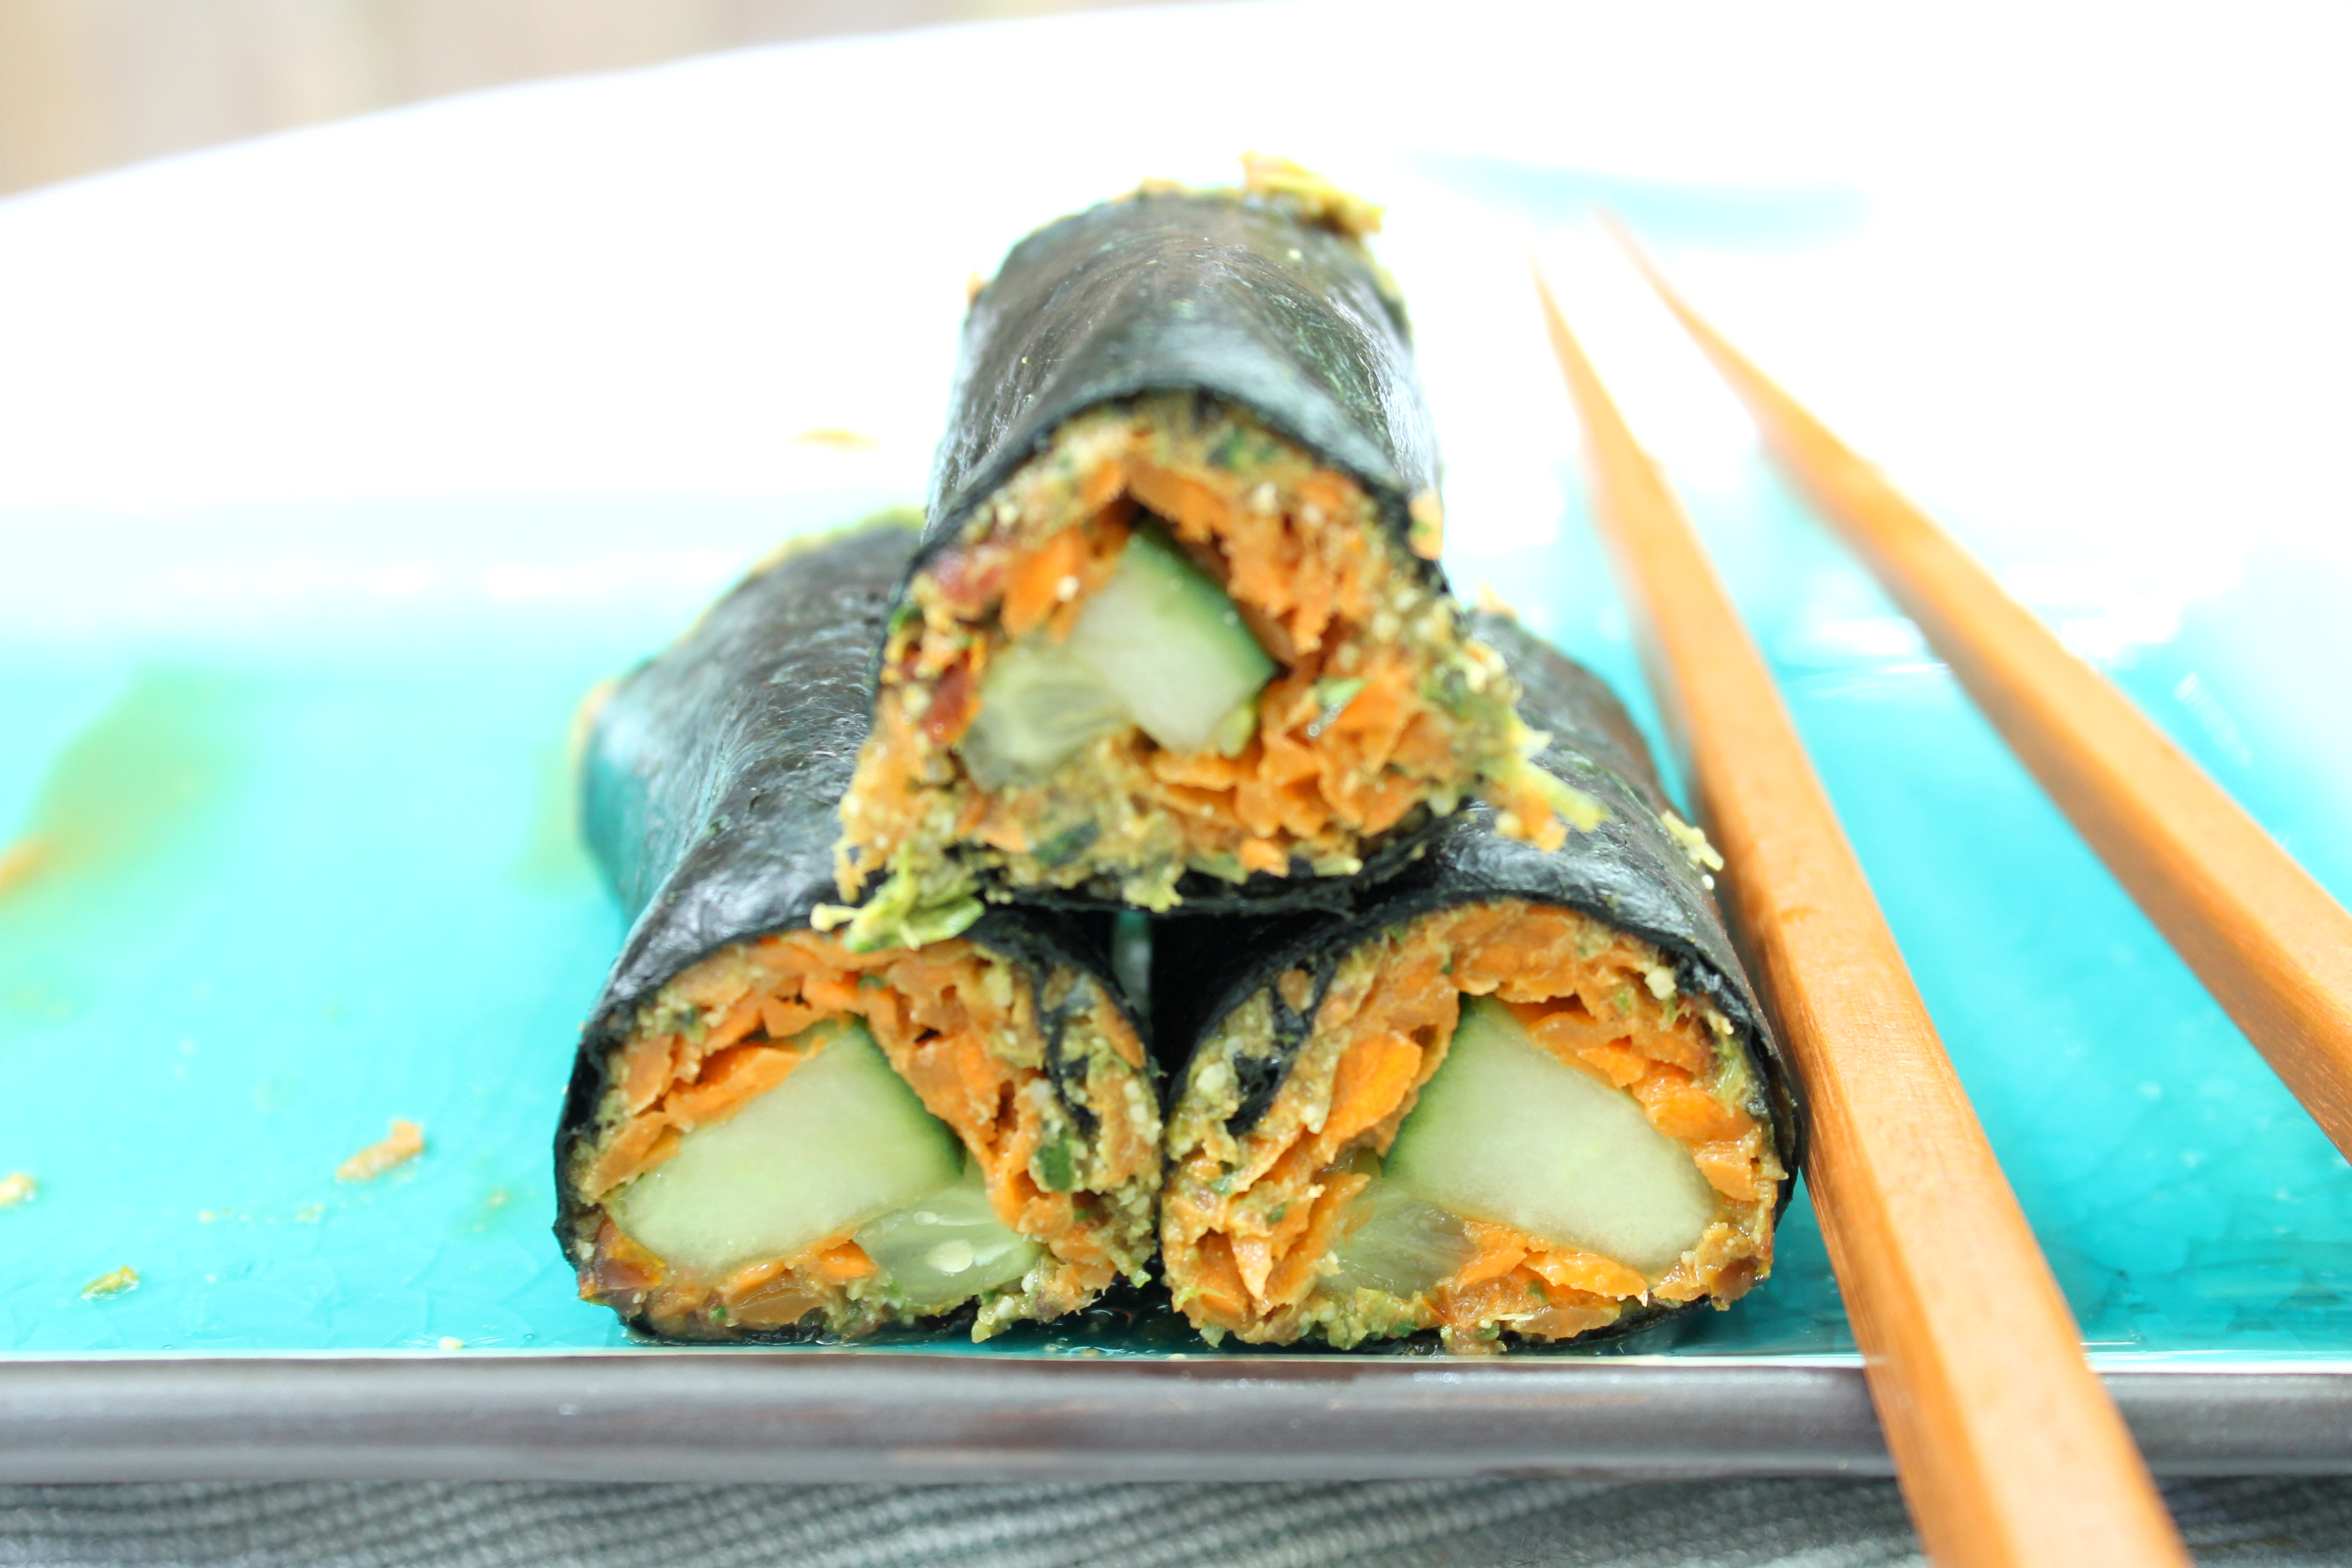 In a Food Rut? Just Roll with it!